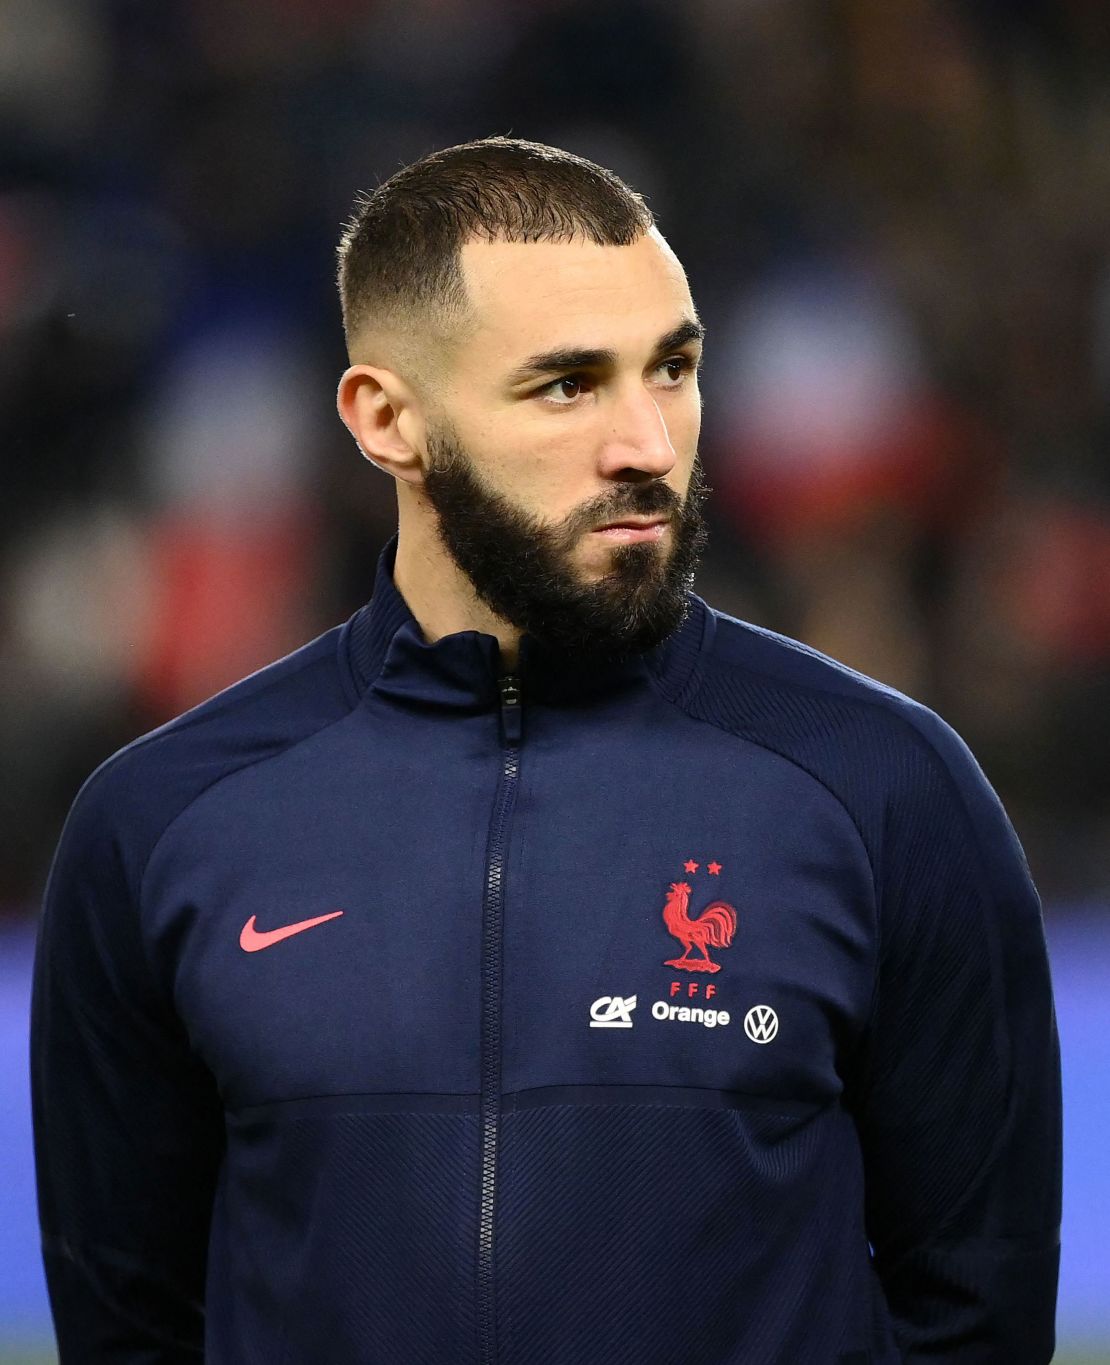 France's forward Karim Benzema poses before the FIFA World Cup 2022 qualification football match between France and Kazakhstan at the Parc des Princes stadium in Paris, on November 13, 2021.